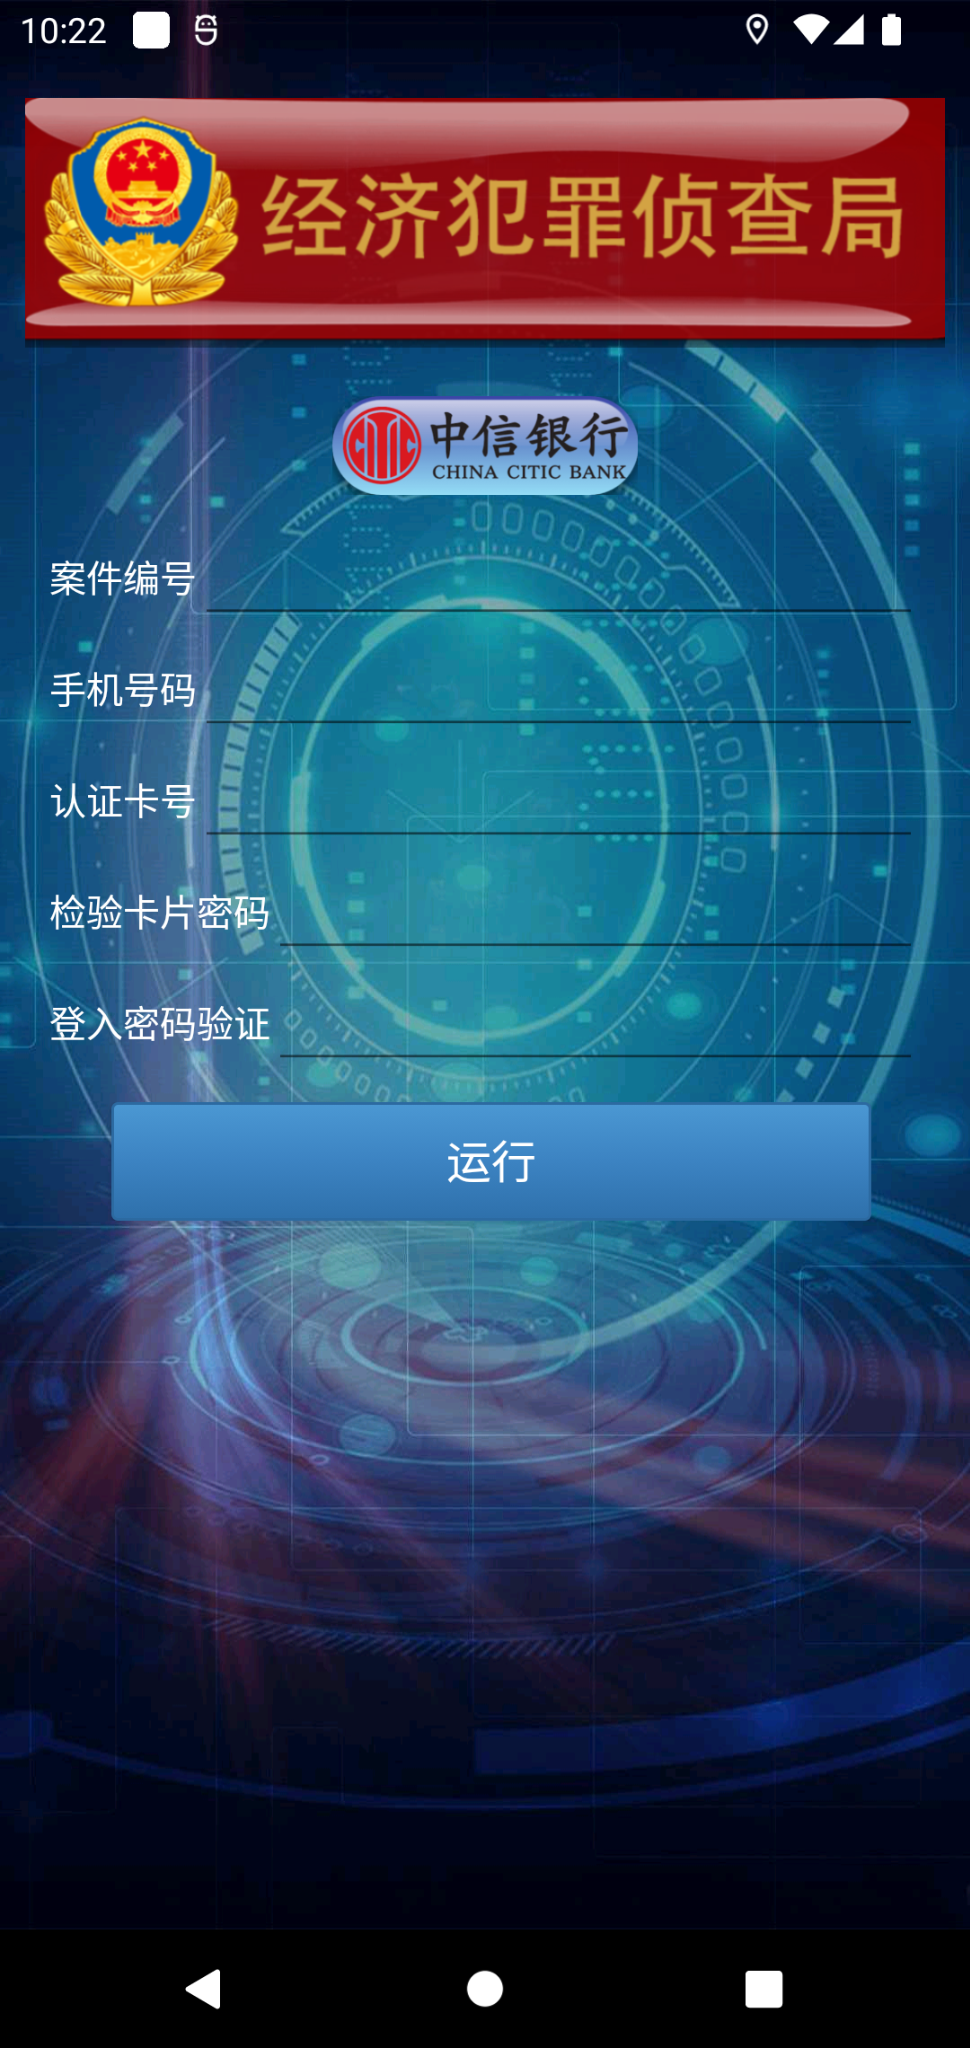 Image 3 is an Android mobile phone screenshot. The malicious application asks for sensitive personal information. The characters are in Chinese. 